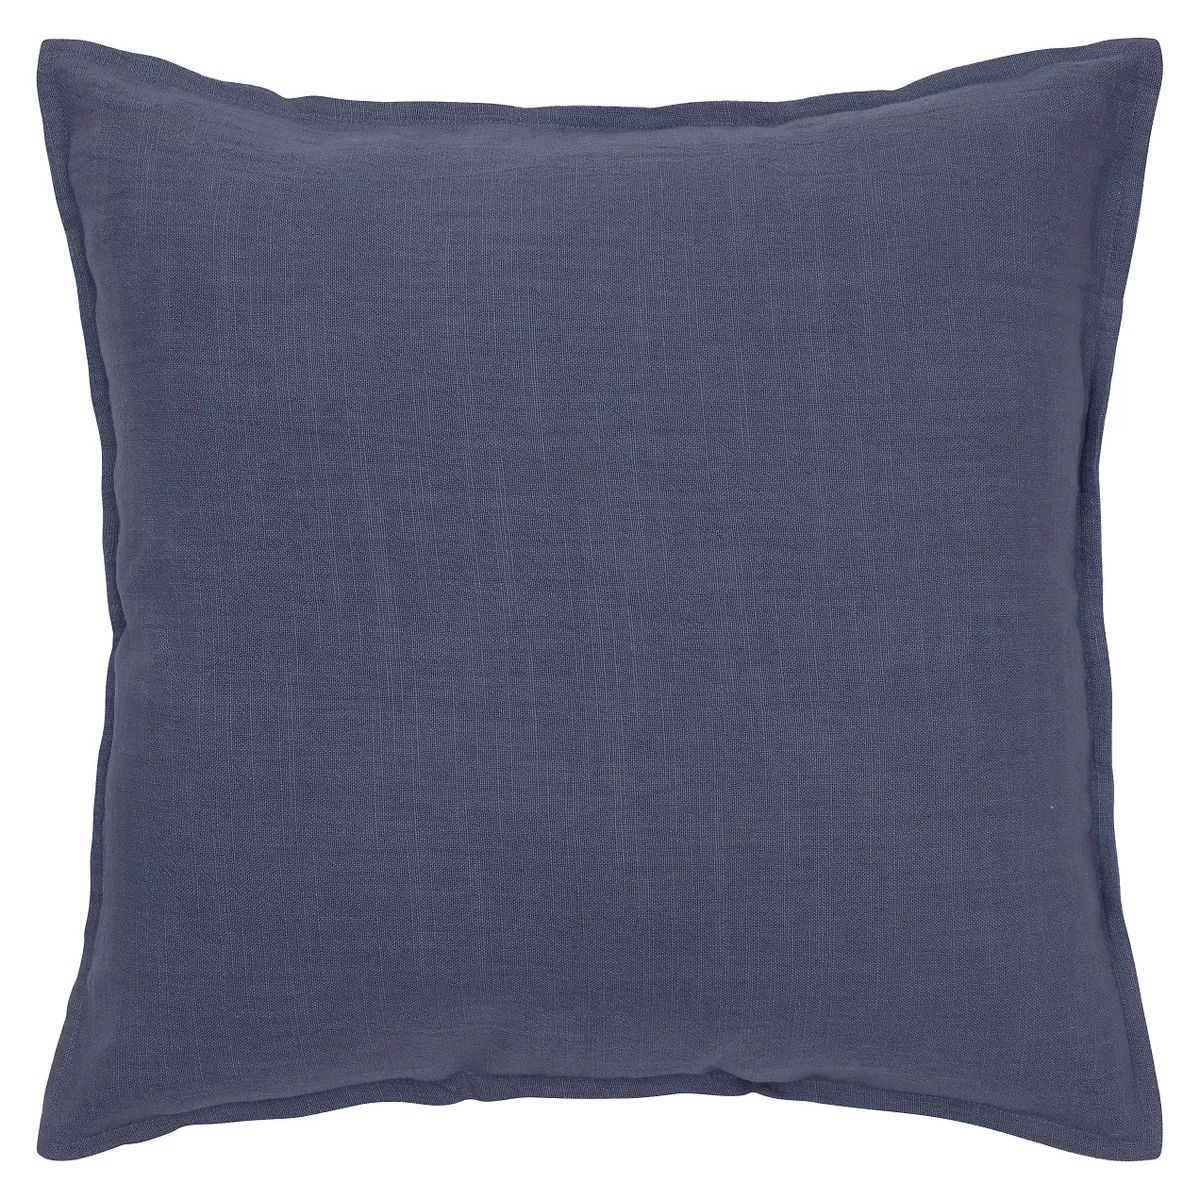 20"x20" Oversize Solid Square Throw Pillow - Rizzy Home | Target